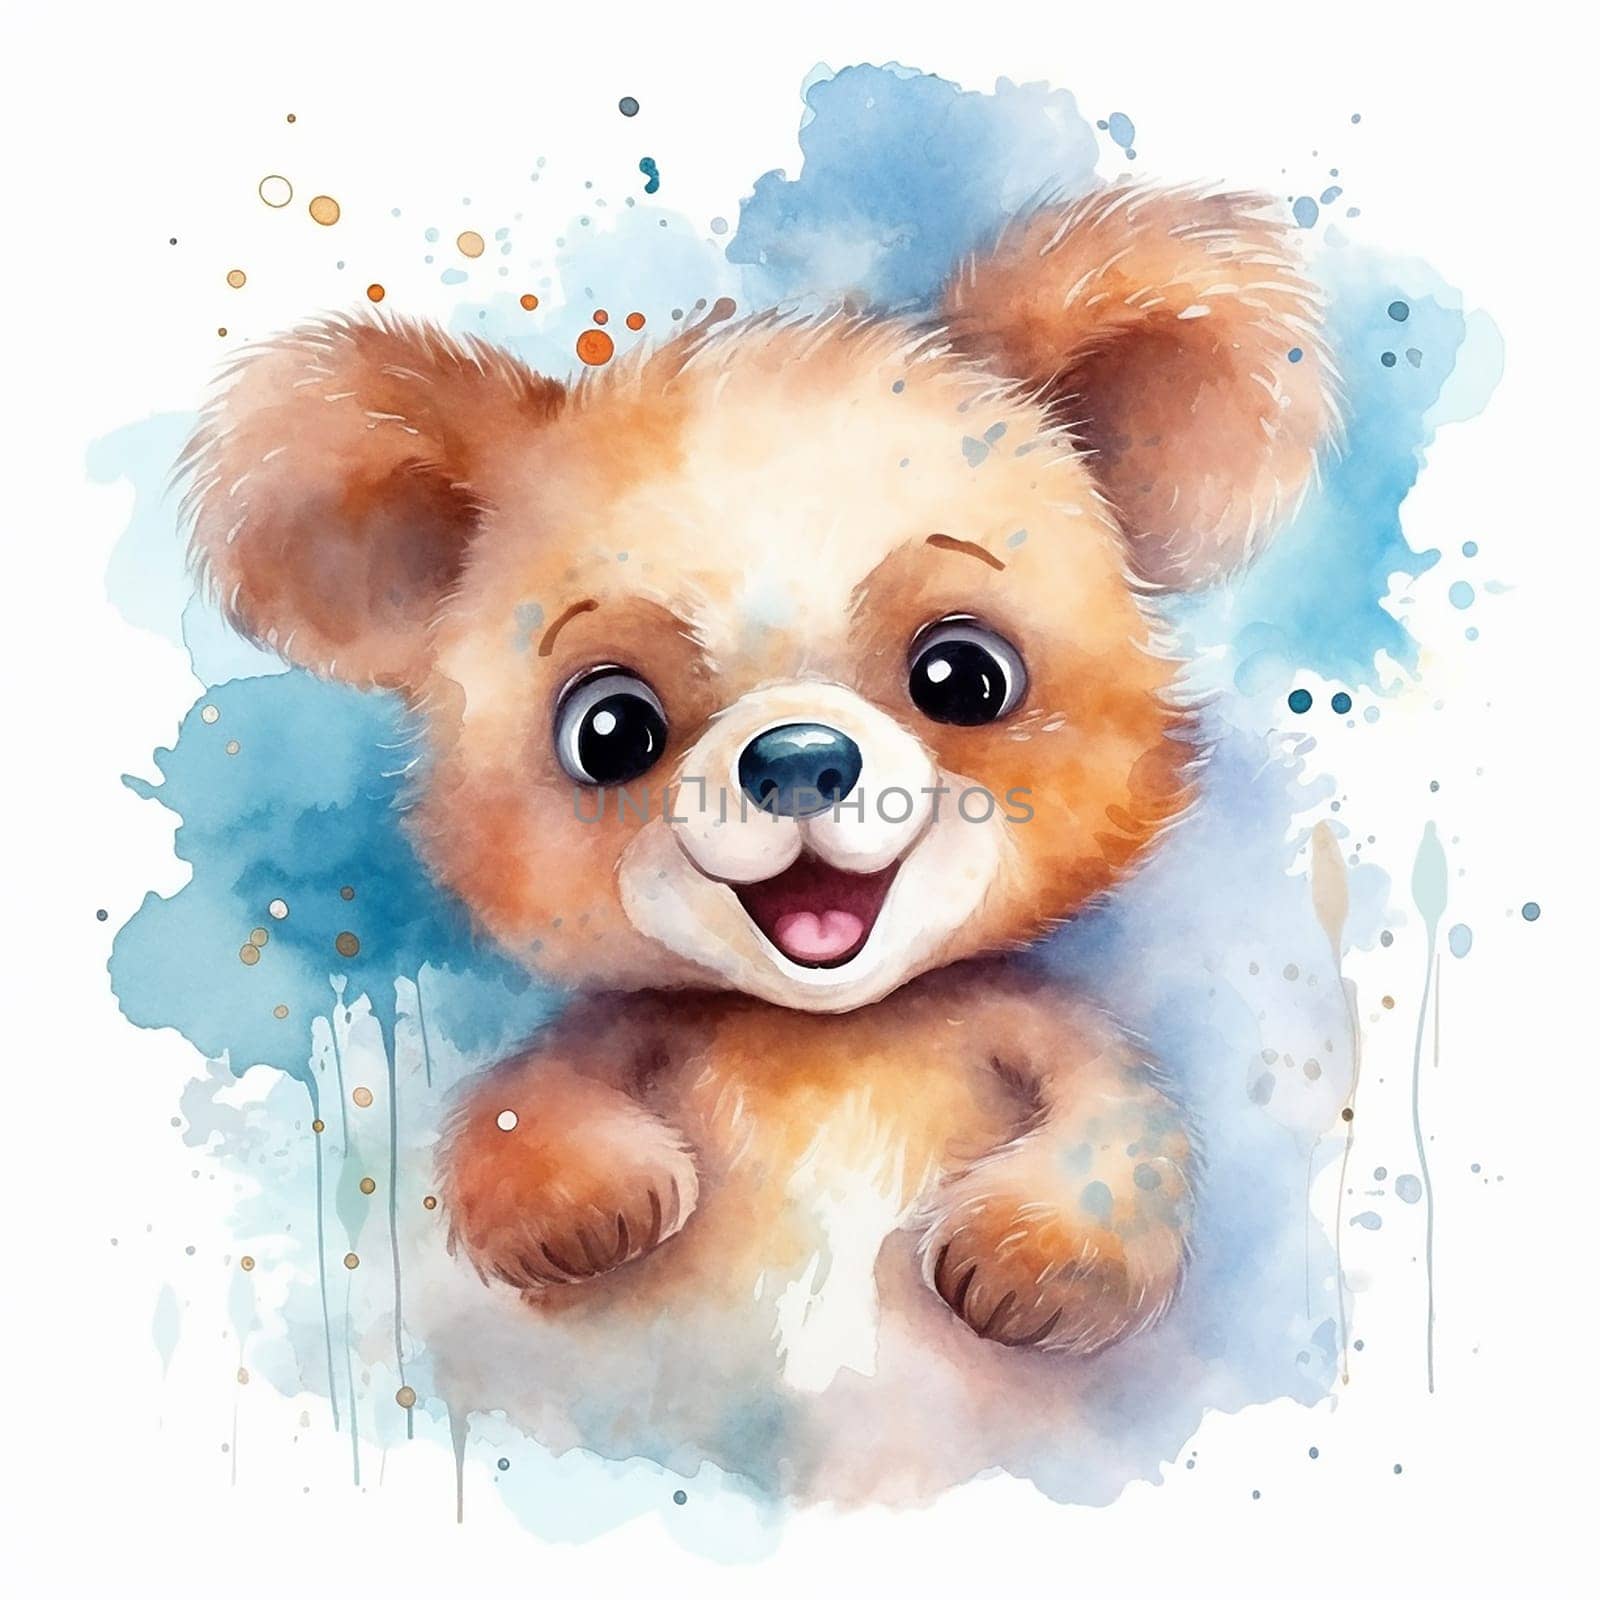 A watercolor painting of a cub brown bear, funny and adorable wallpaper, white background